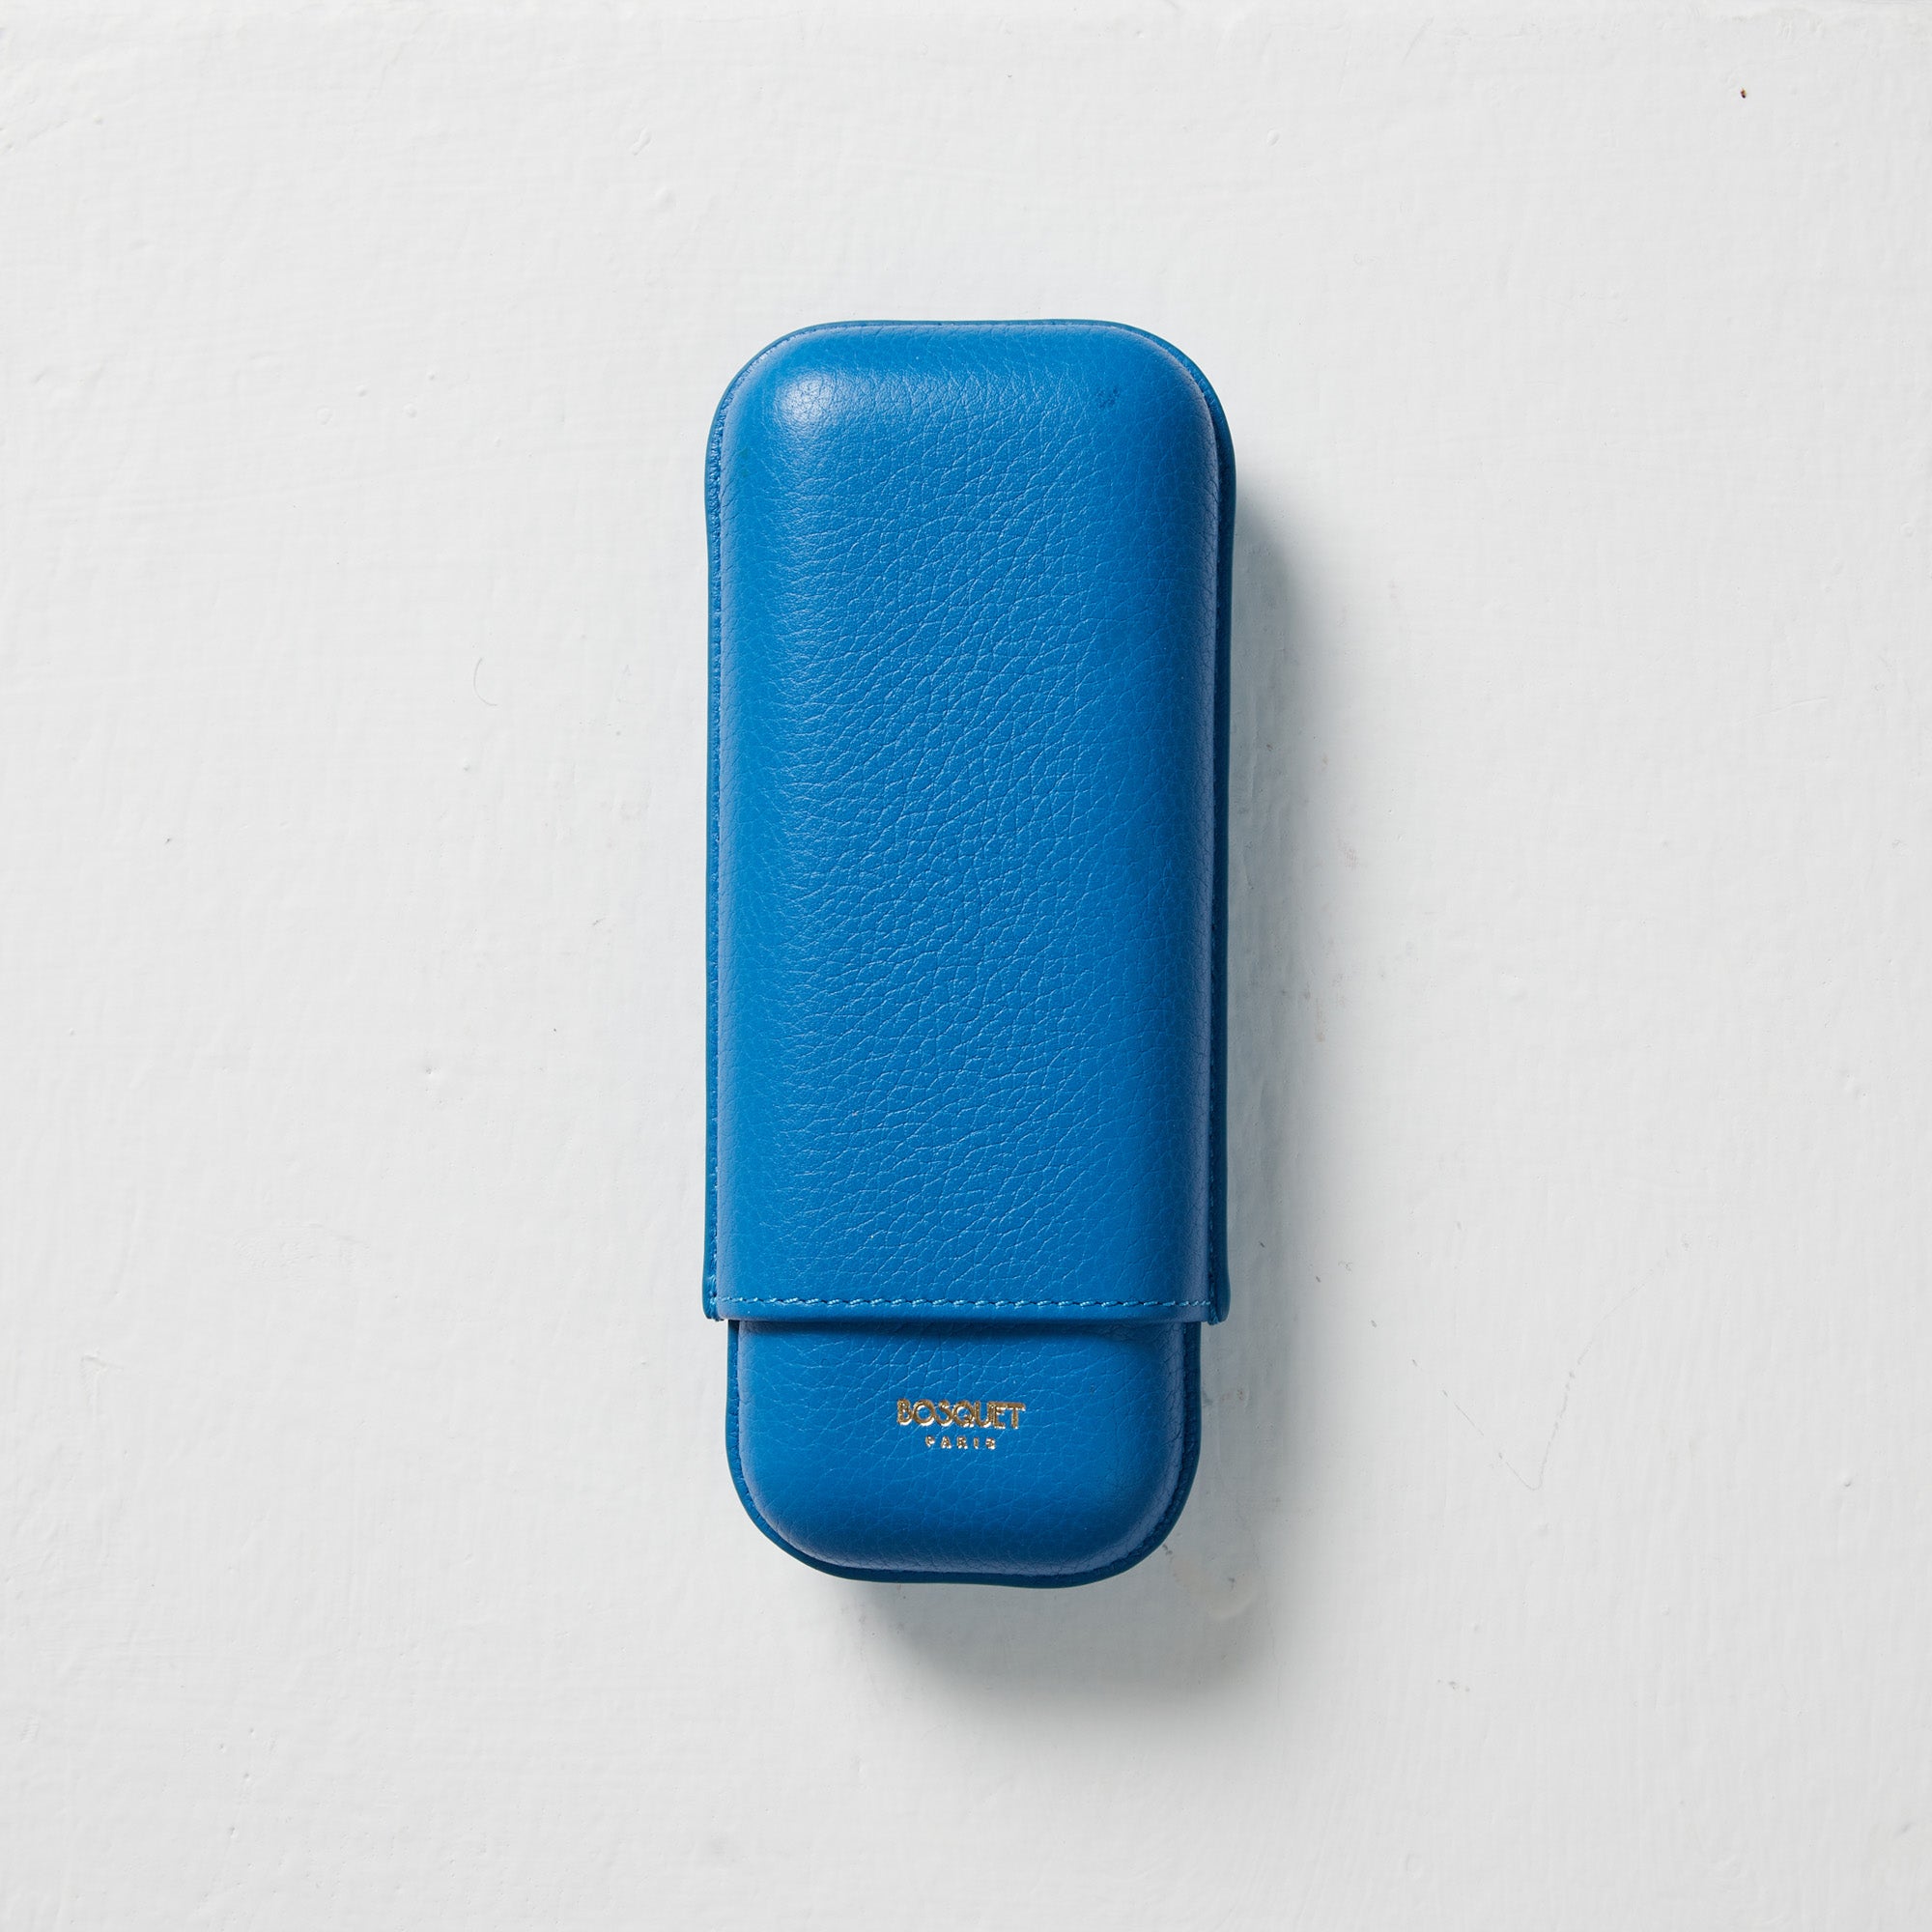 A Bosque Bosquet Smooth Capri Blue Leather Cigar Case sitting on a white surface.